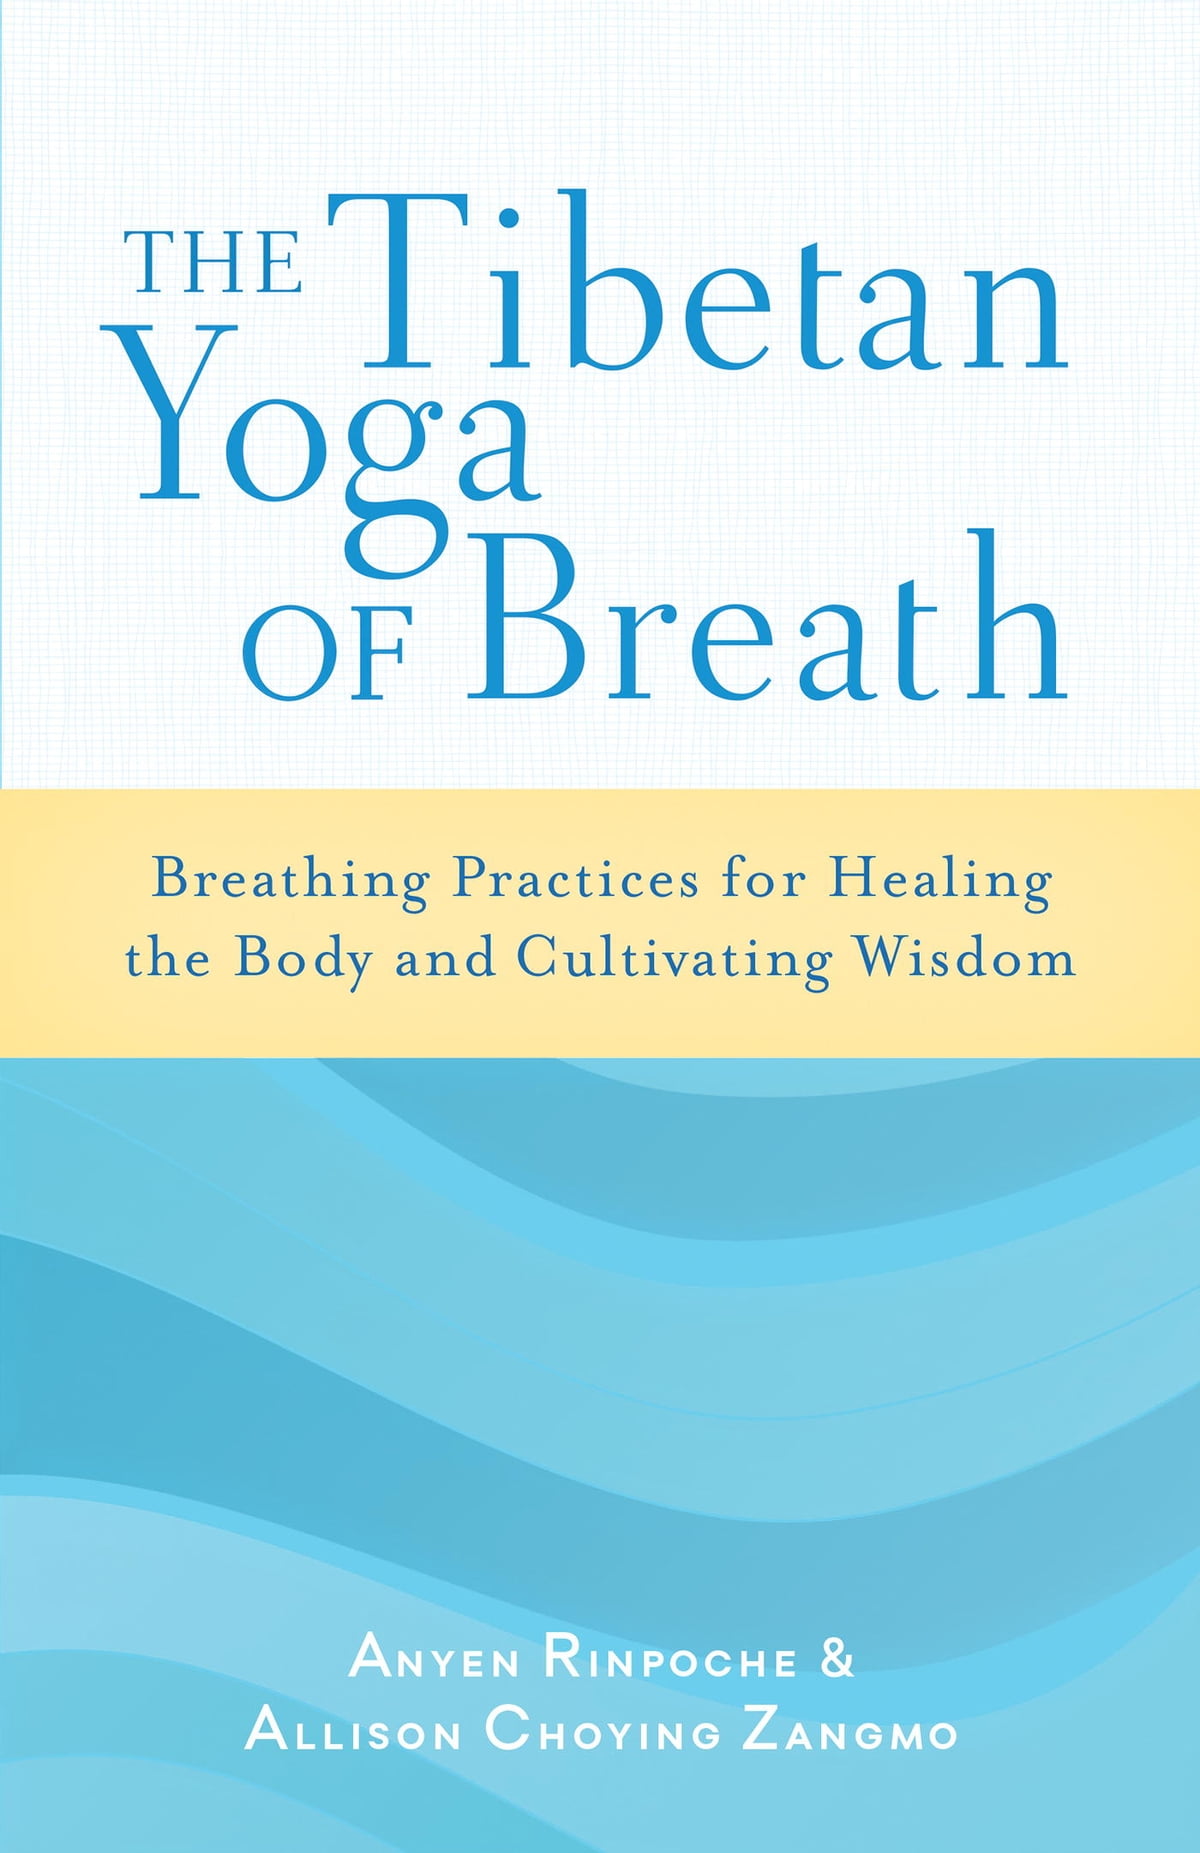 Anyen Rinpoche & Allison Choying Zangmo - The Tibetan Yoga of Breath: Breathing Practices for Healing the Body and Cultivating Wisdom